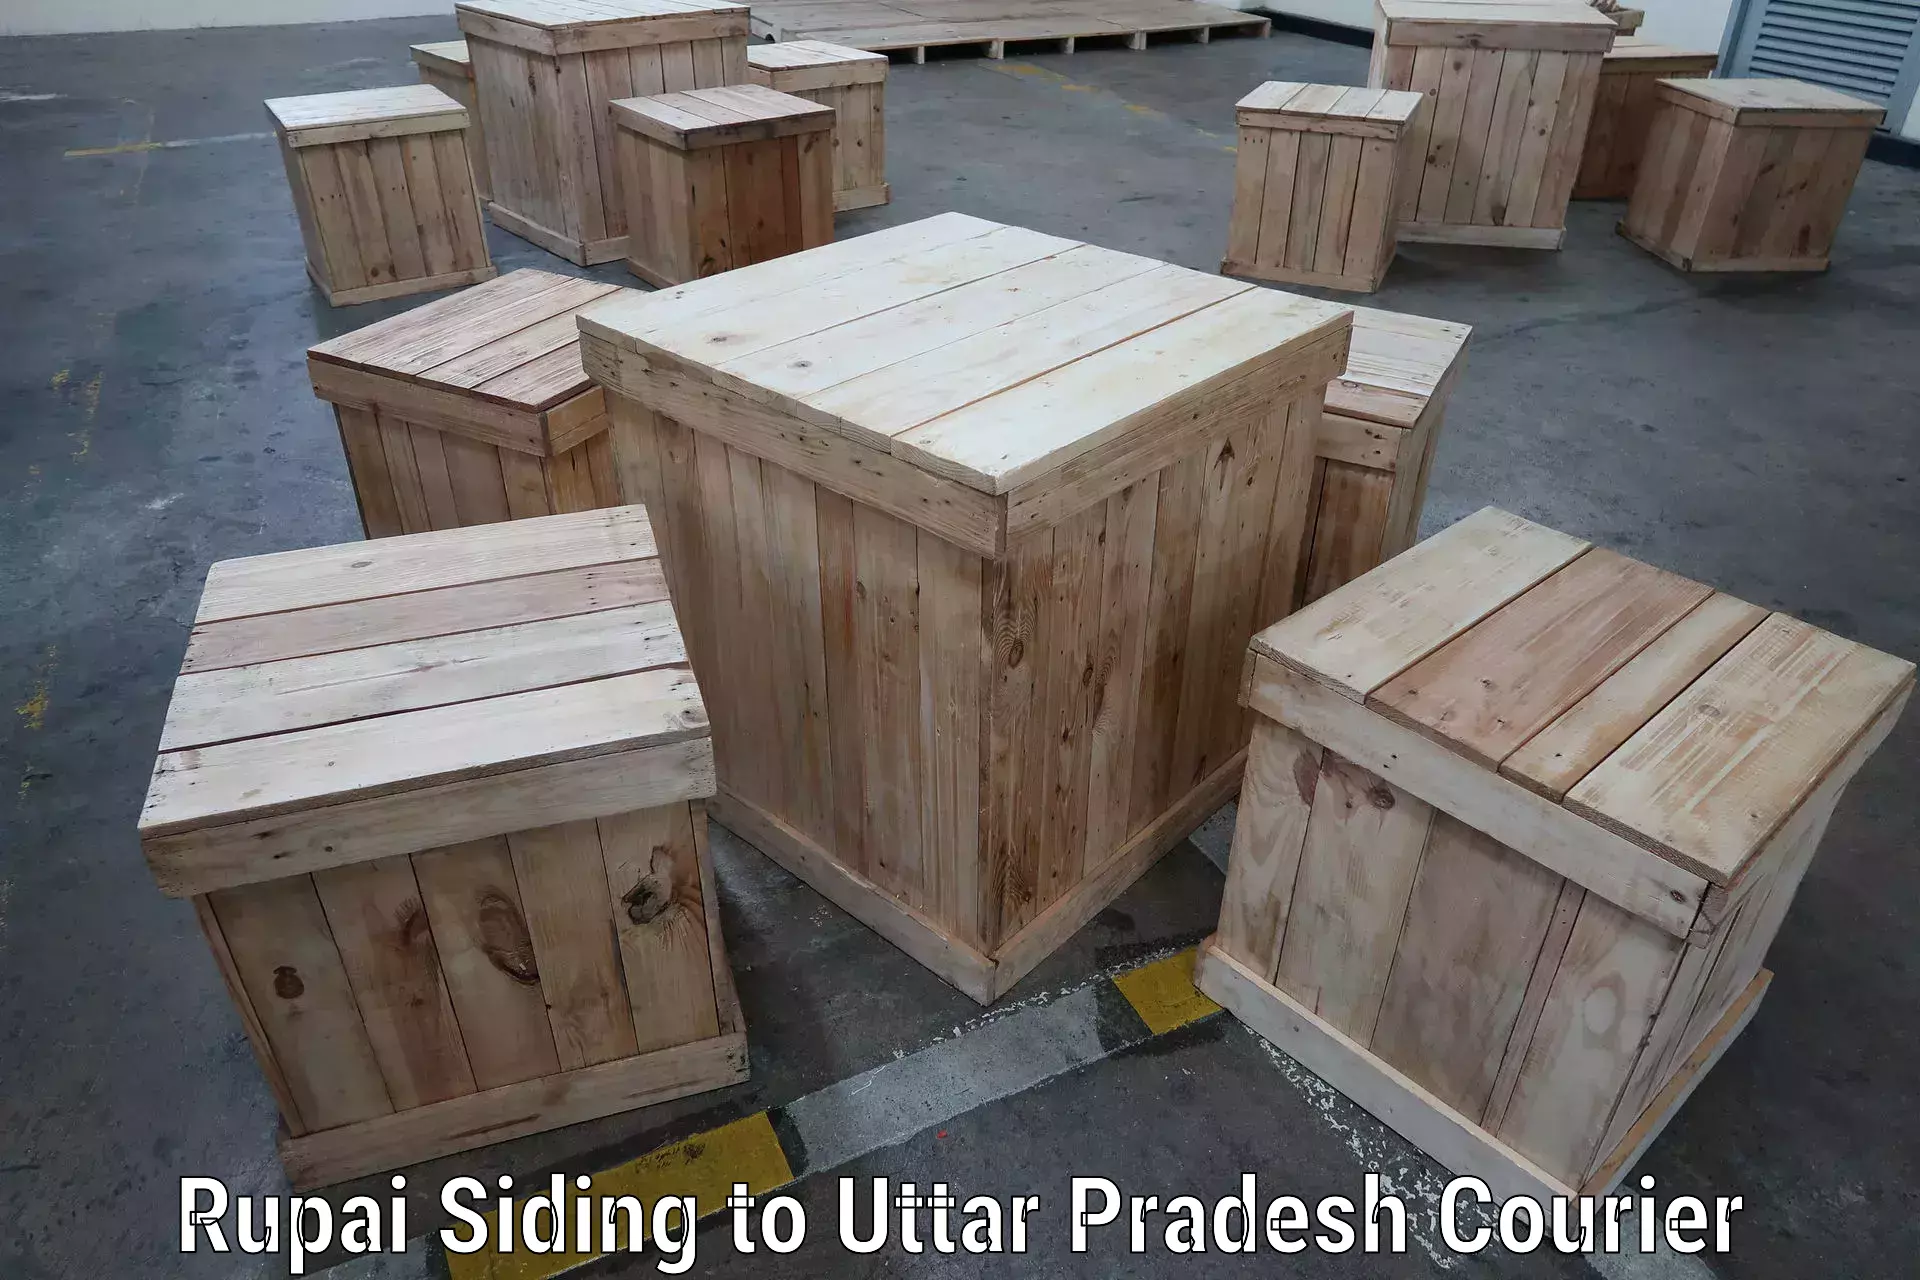 Specialized shipment handling Rupai Siding to Baghpat